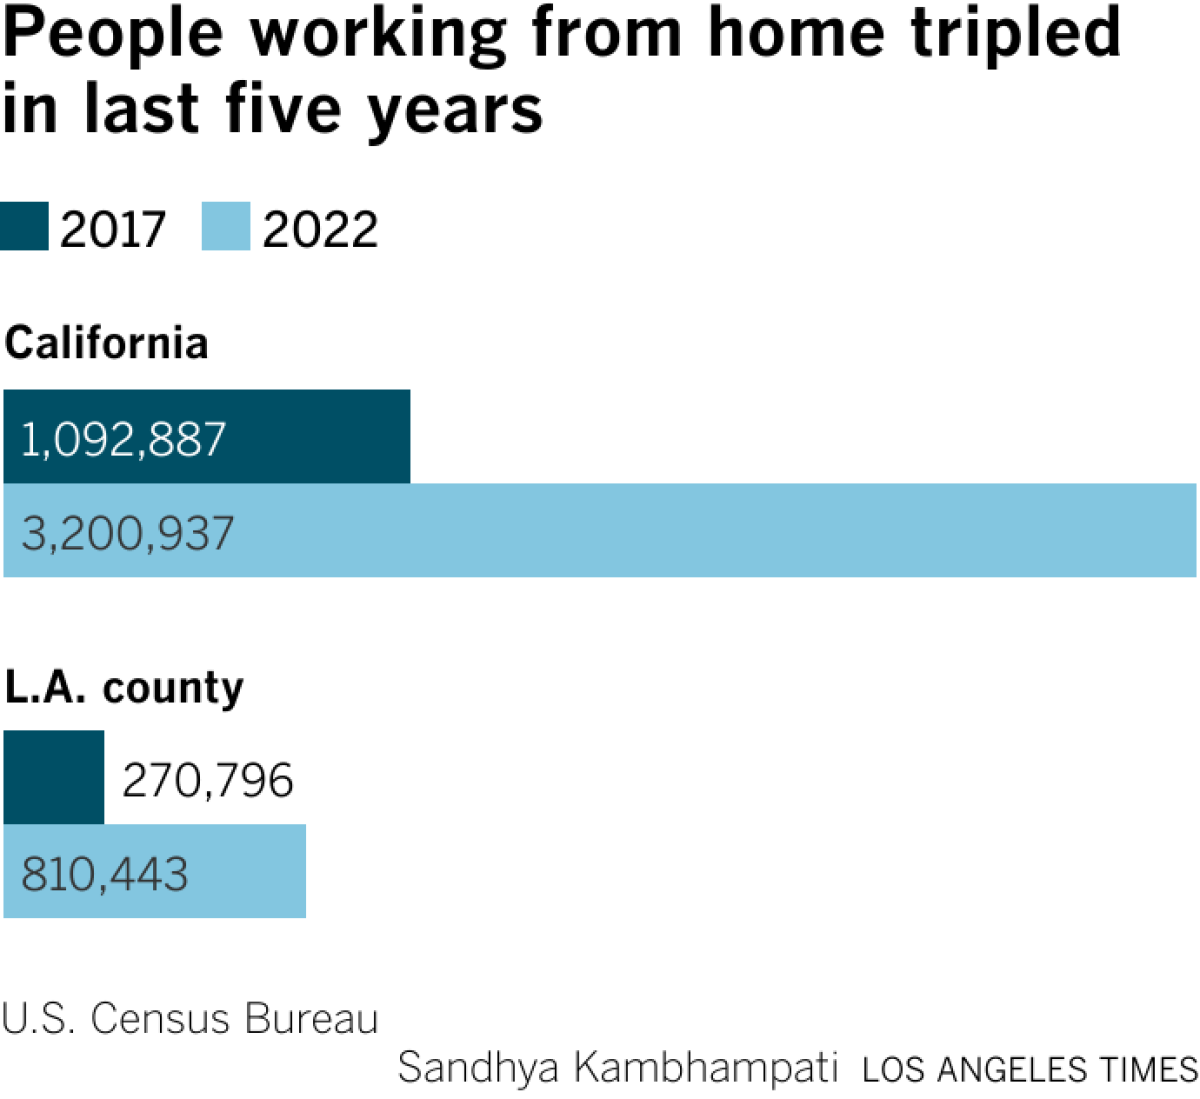 Arrow chart showing the growth in people working from home tripling